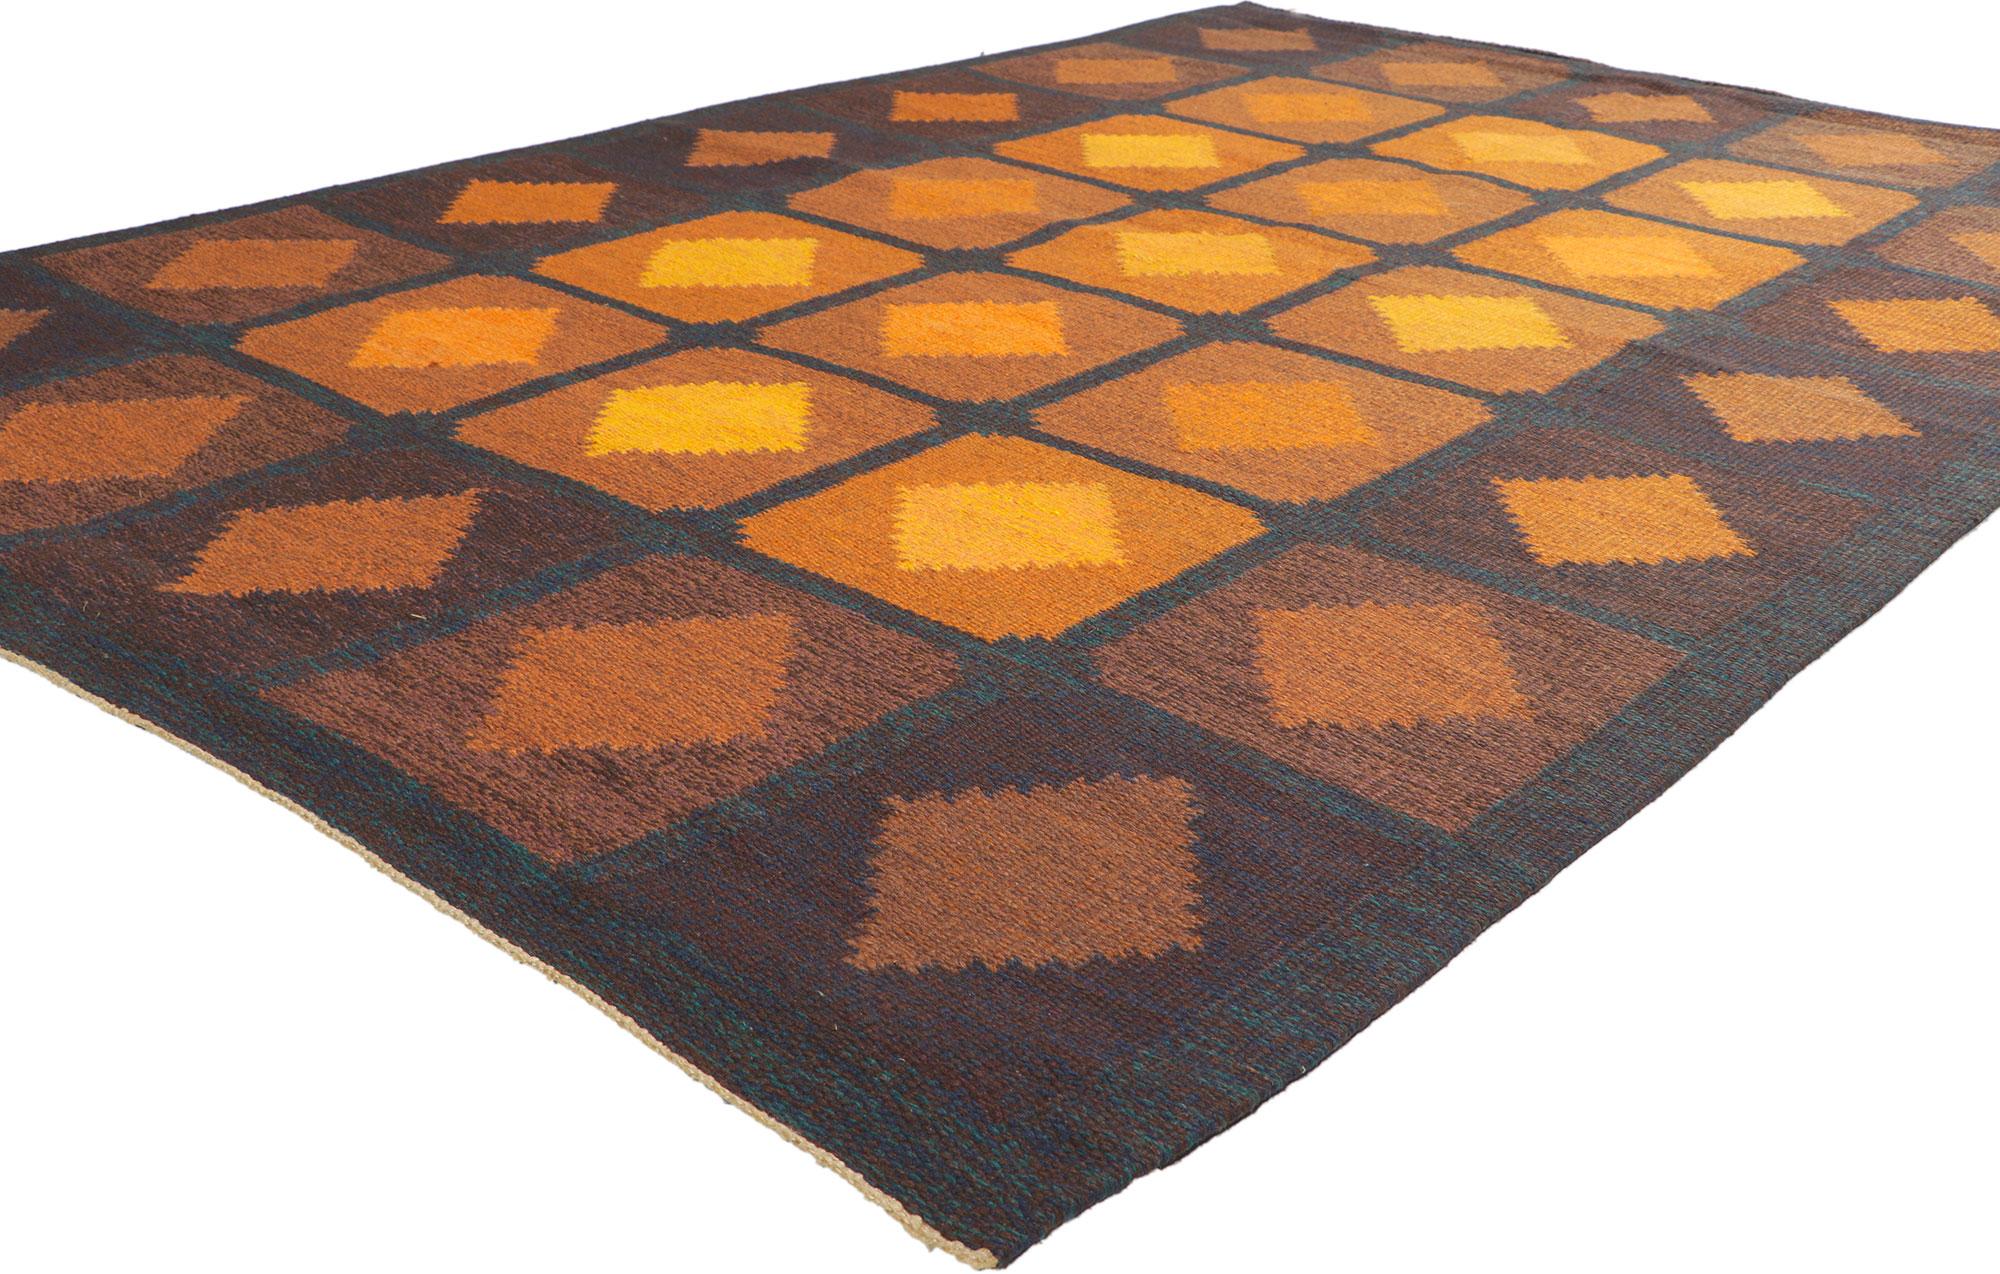 78483 Vintage Swedish Kilim Rug Brita Svefors Rollakan, 05'02 x 07'10. Showcasing the bolder side of Scandinavian design, this handwoven vintage Swedish rollakan rug is a captivating vision of woven beauty. The checkered pattern and earthy colorway